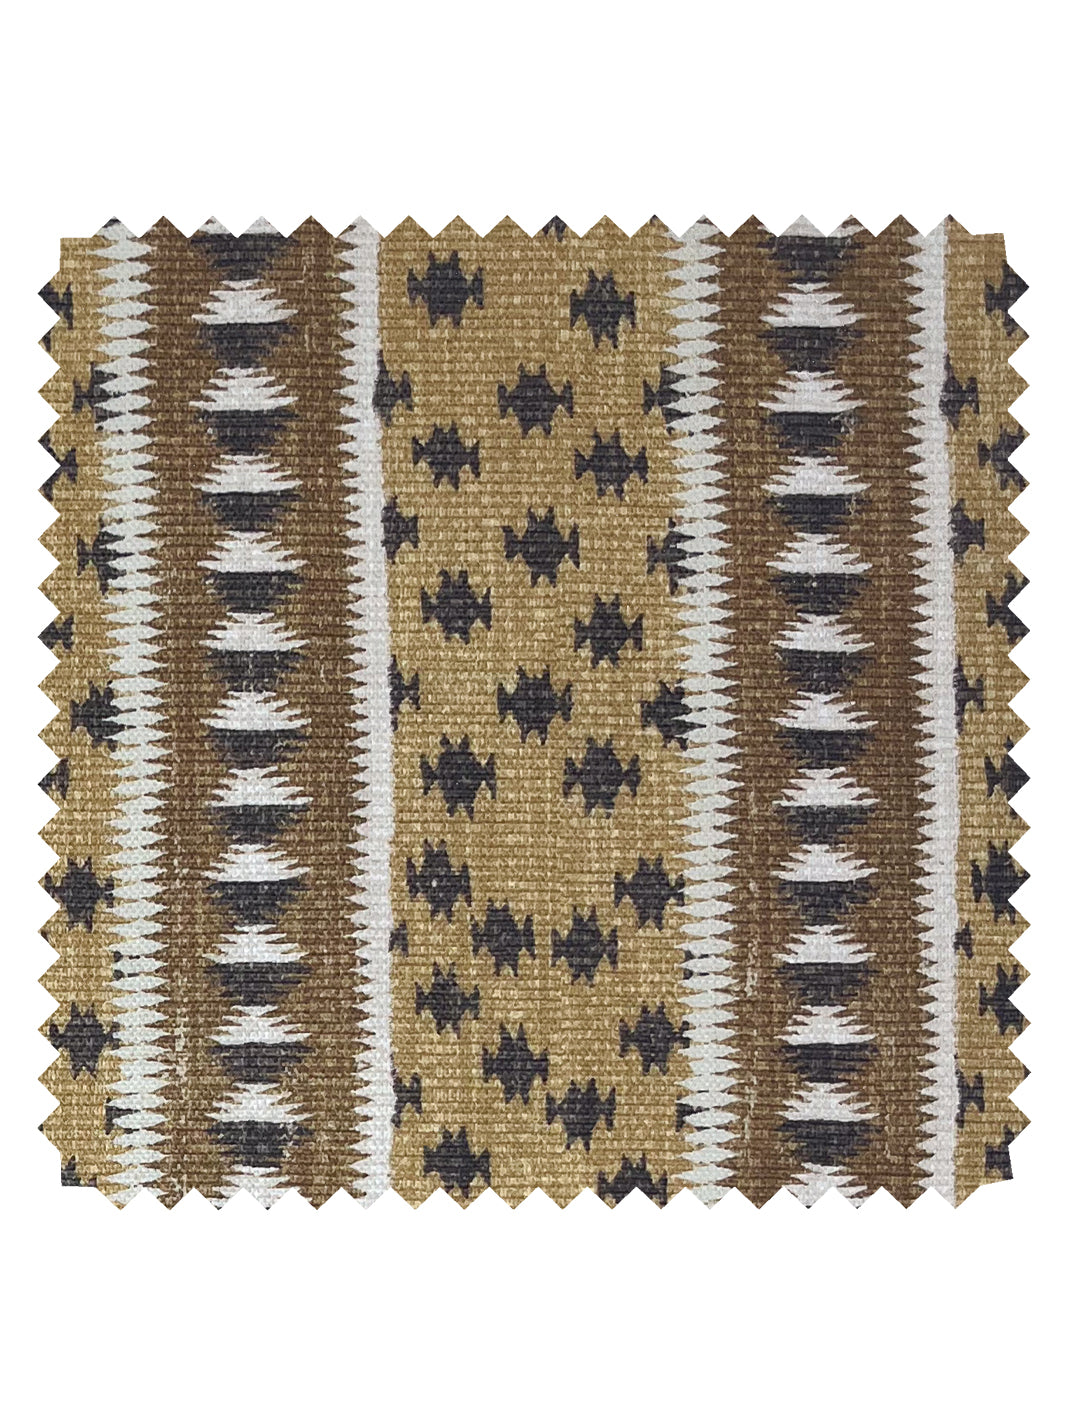 'Northstar Stripe' Linen Fabric by Nathan Turner - Gold Brown